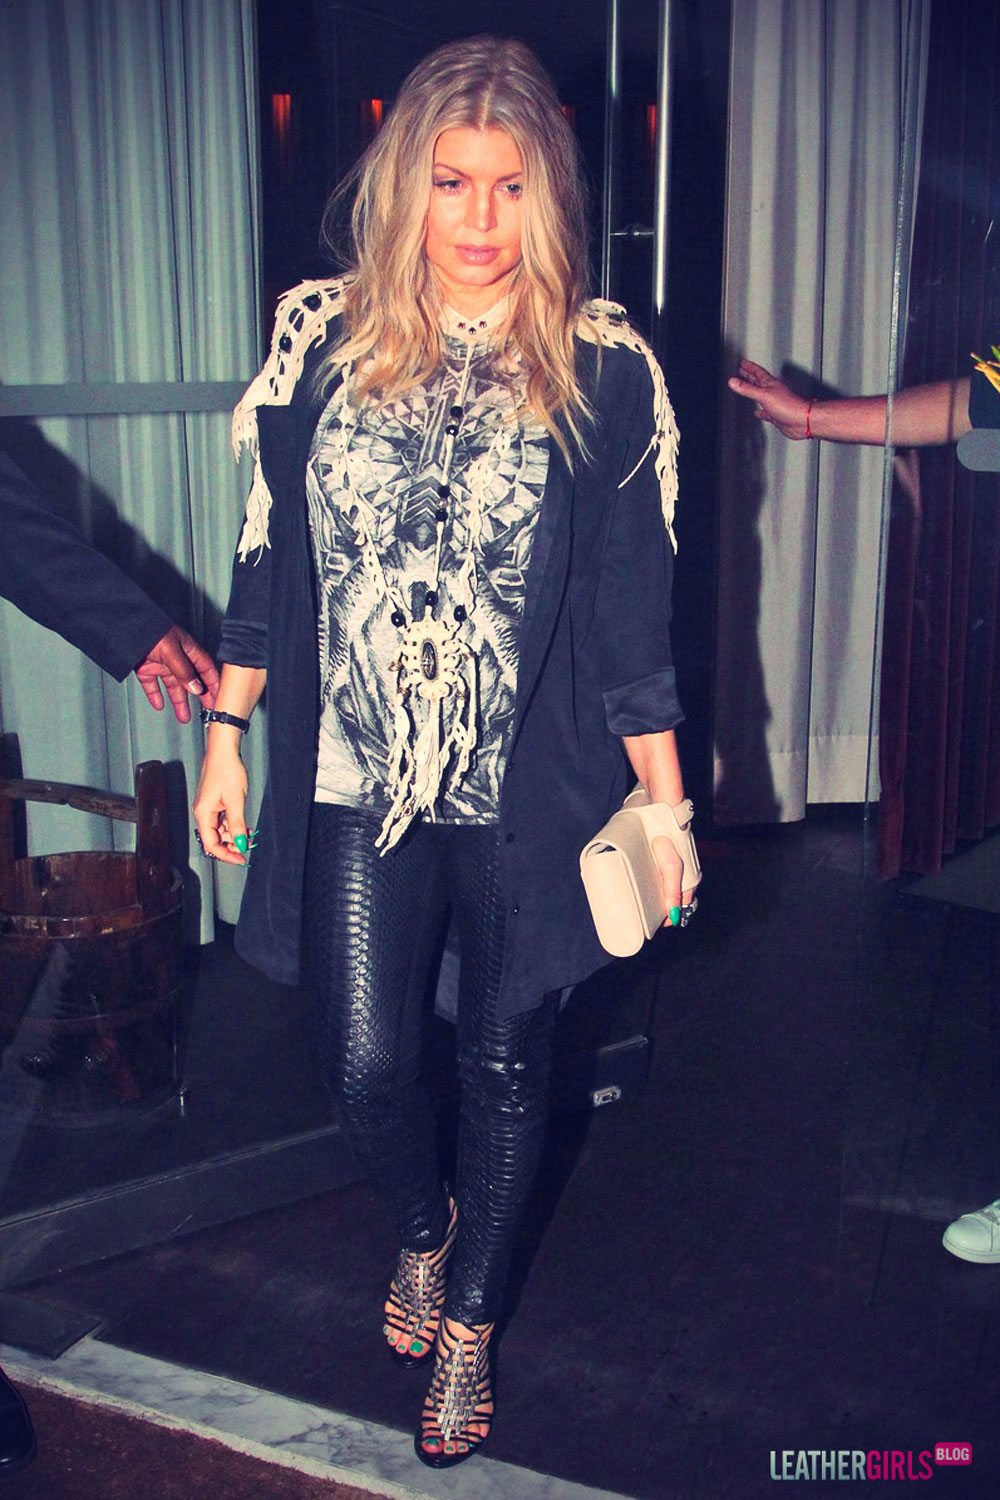 Fergie keeps it fierce while arriving at Gero Restaurant